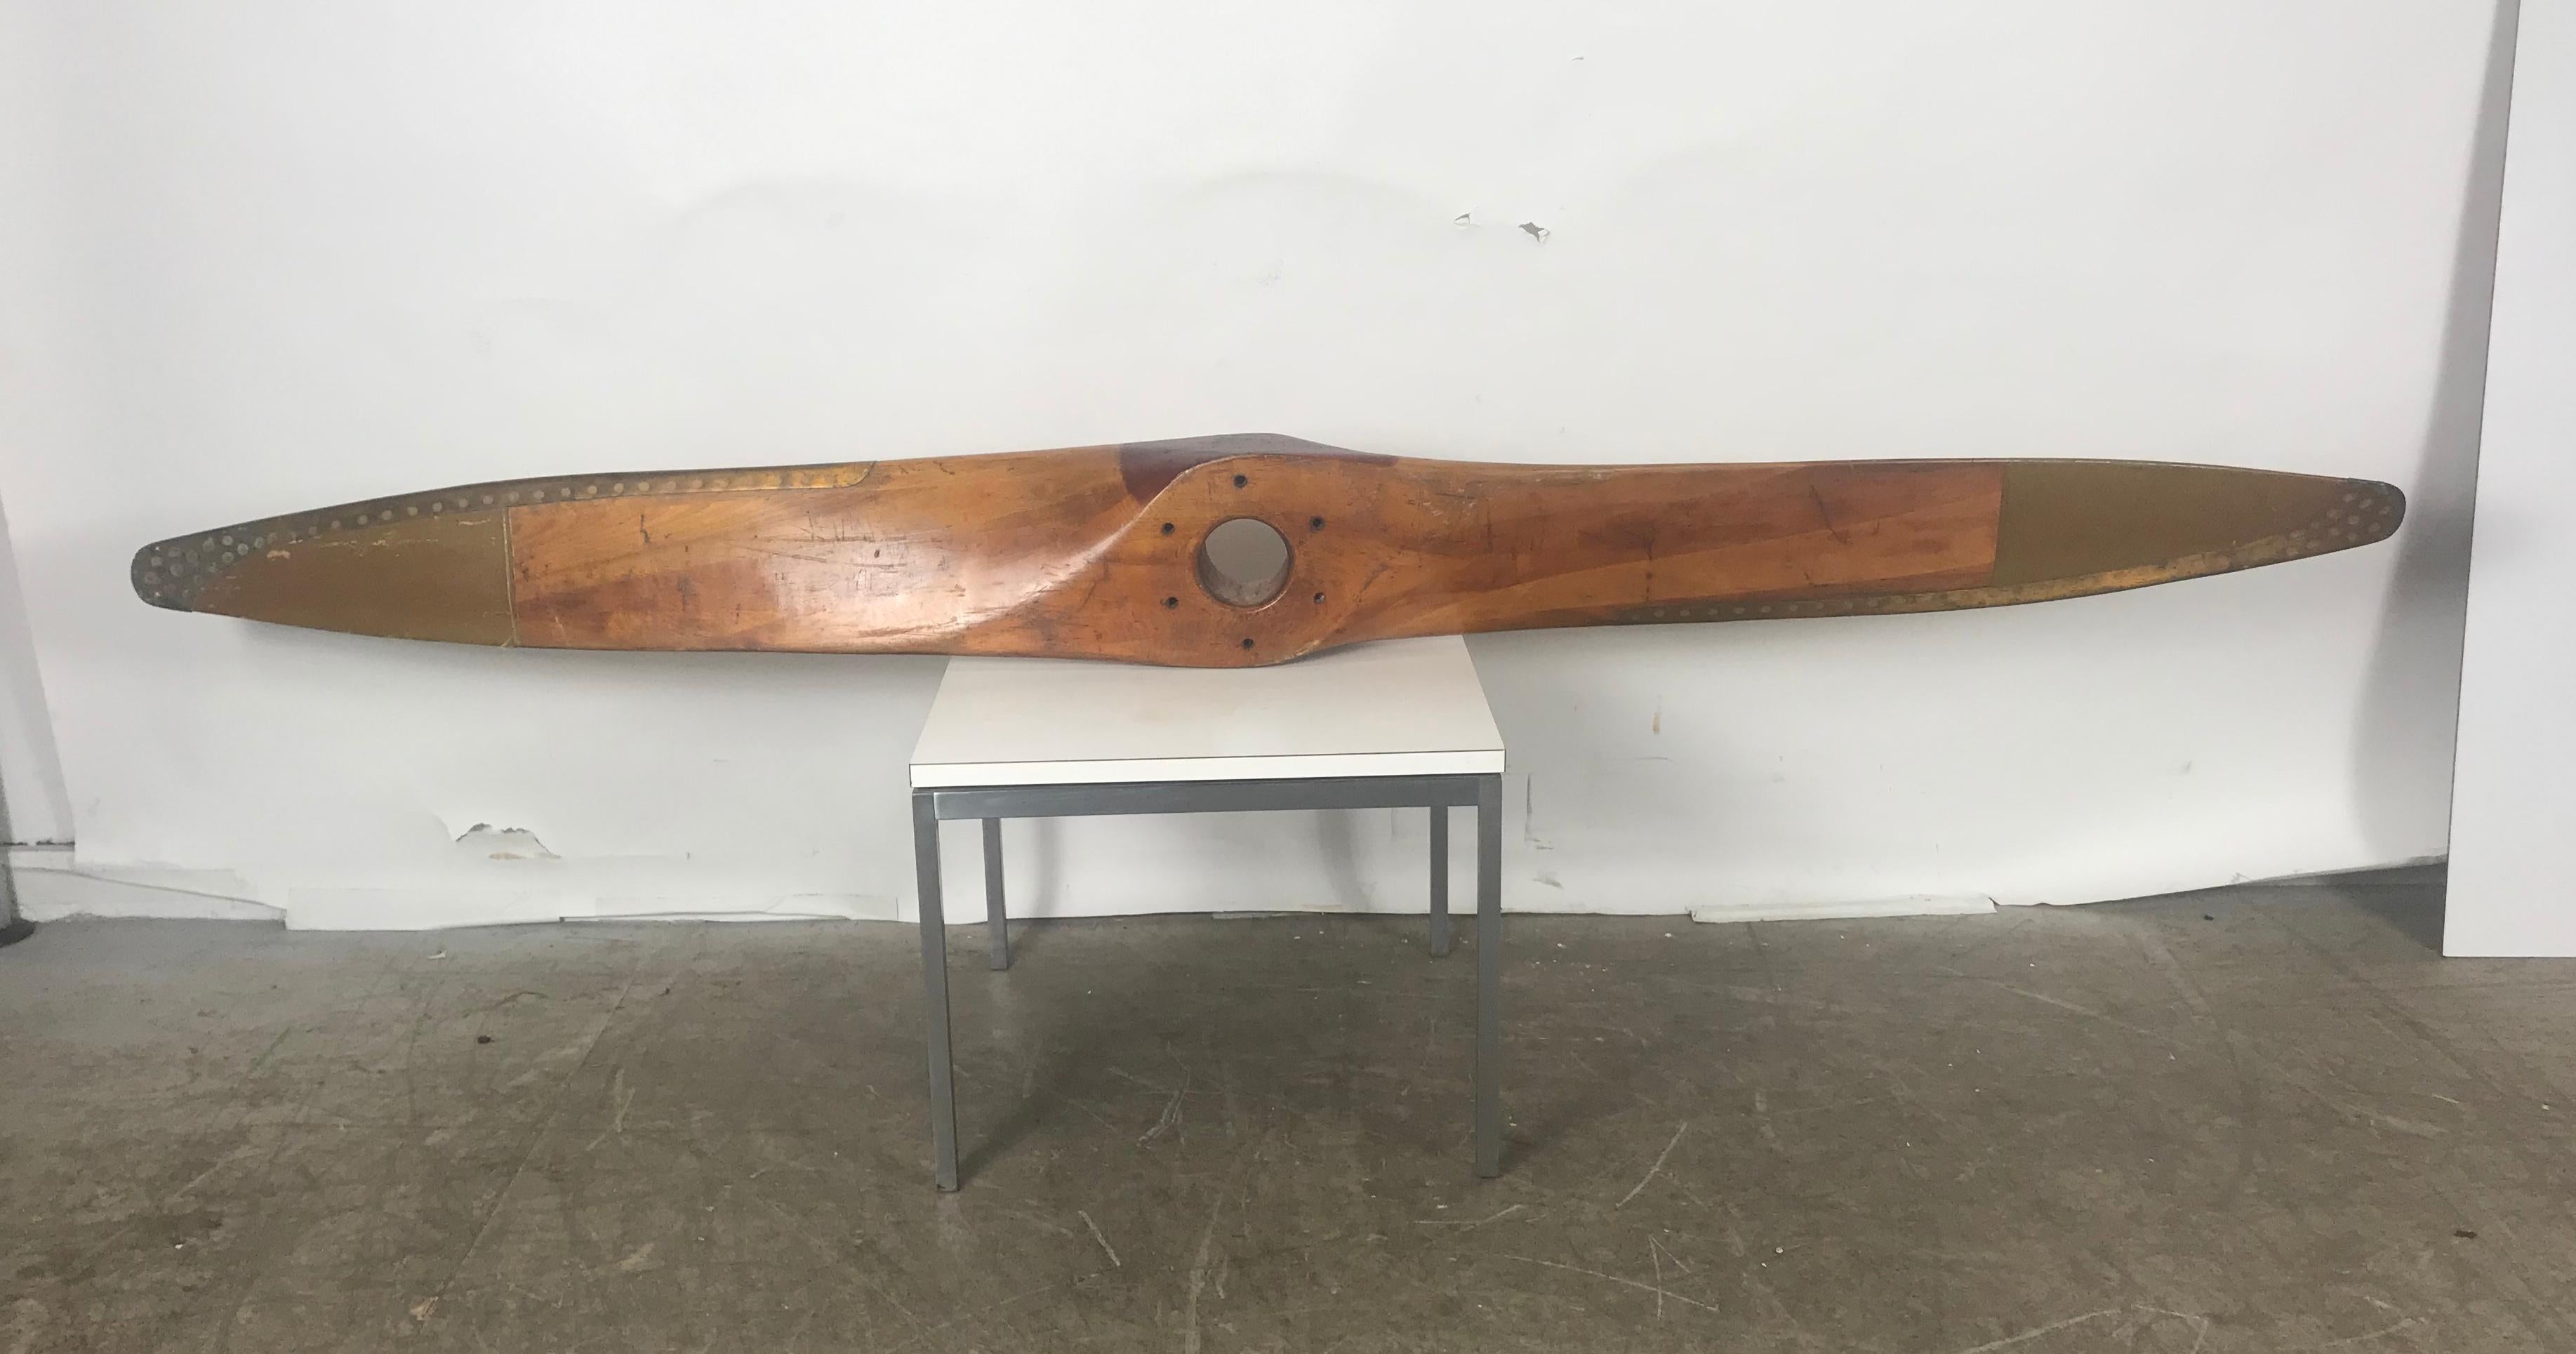 A beautiful wooden airplane propeller manufactured by Fahlin, Columbia Mo., circa 1940s. Salvaged from Curtis Wright, this eye-catching piece is made of high quality wood in a beautiful warm color tones woods and brass strips to the sides, red